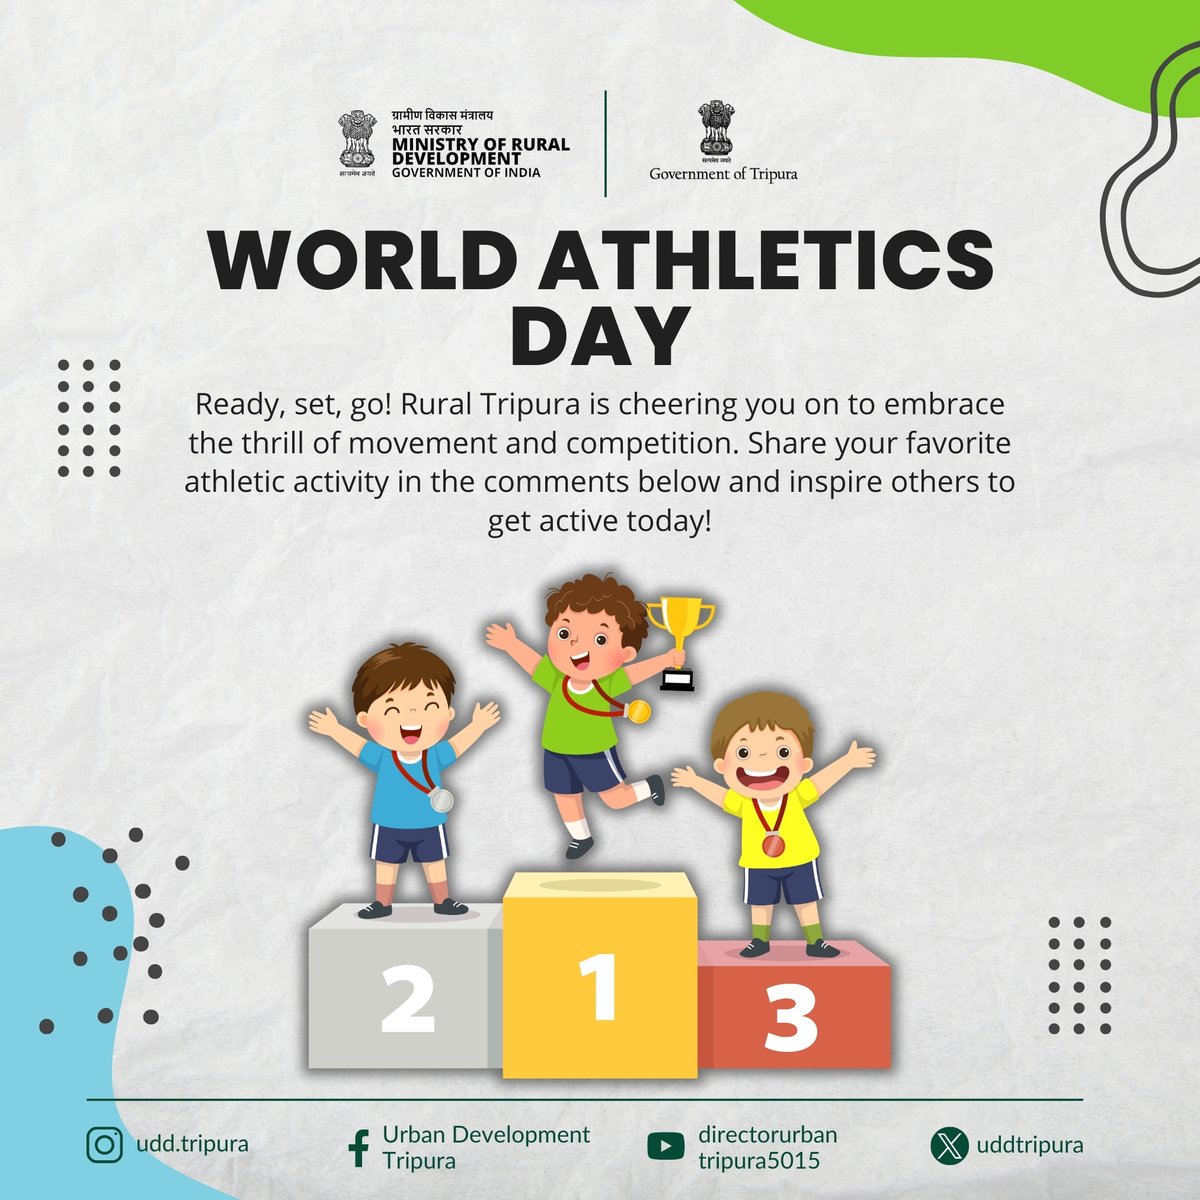 Embrace the rhythm of rural vitality! On World Athletics Day, Rural Tripura echoes with the sound of footsteps as we celebrate the joy of movement and healthy living. Let's run towards a brighter, more active future together! #RuralRhythms #ActiveLiving #CommunityWellness